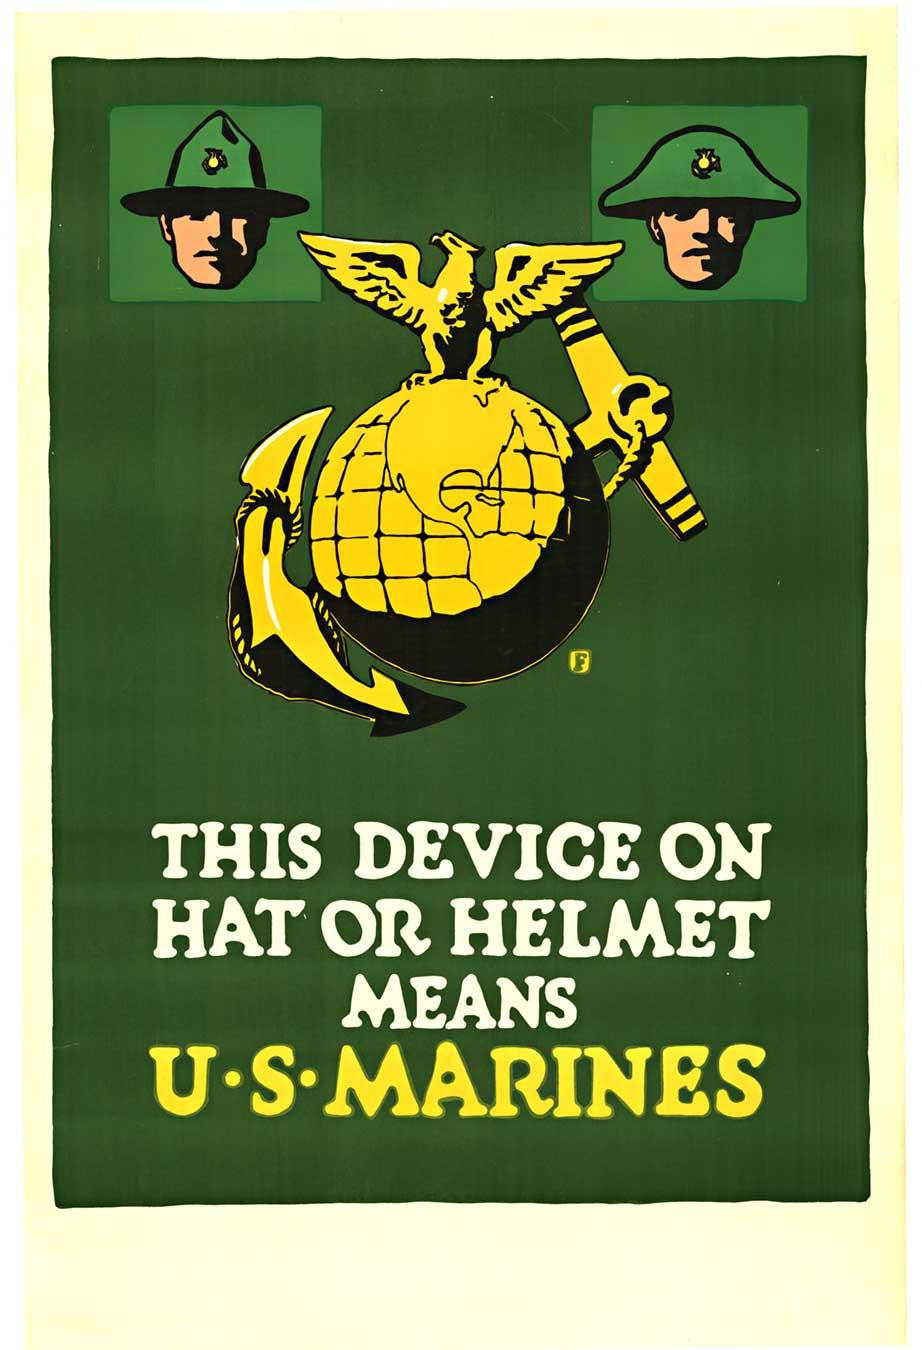 Charles Buckles Falls.  a.k.a. C. B. Falls Print - Original "This Device on Hat or Helmet means U. S. MARINES" vintage poster